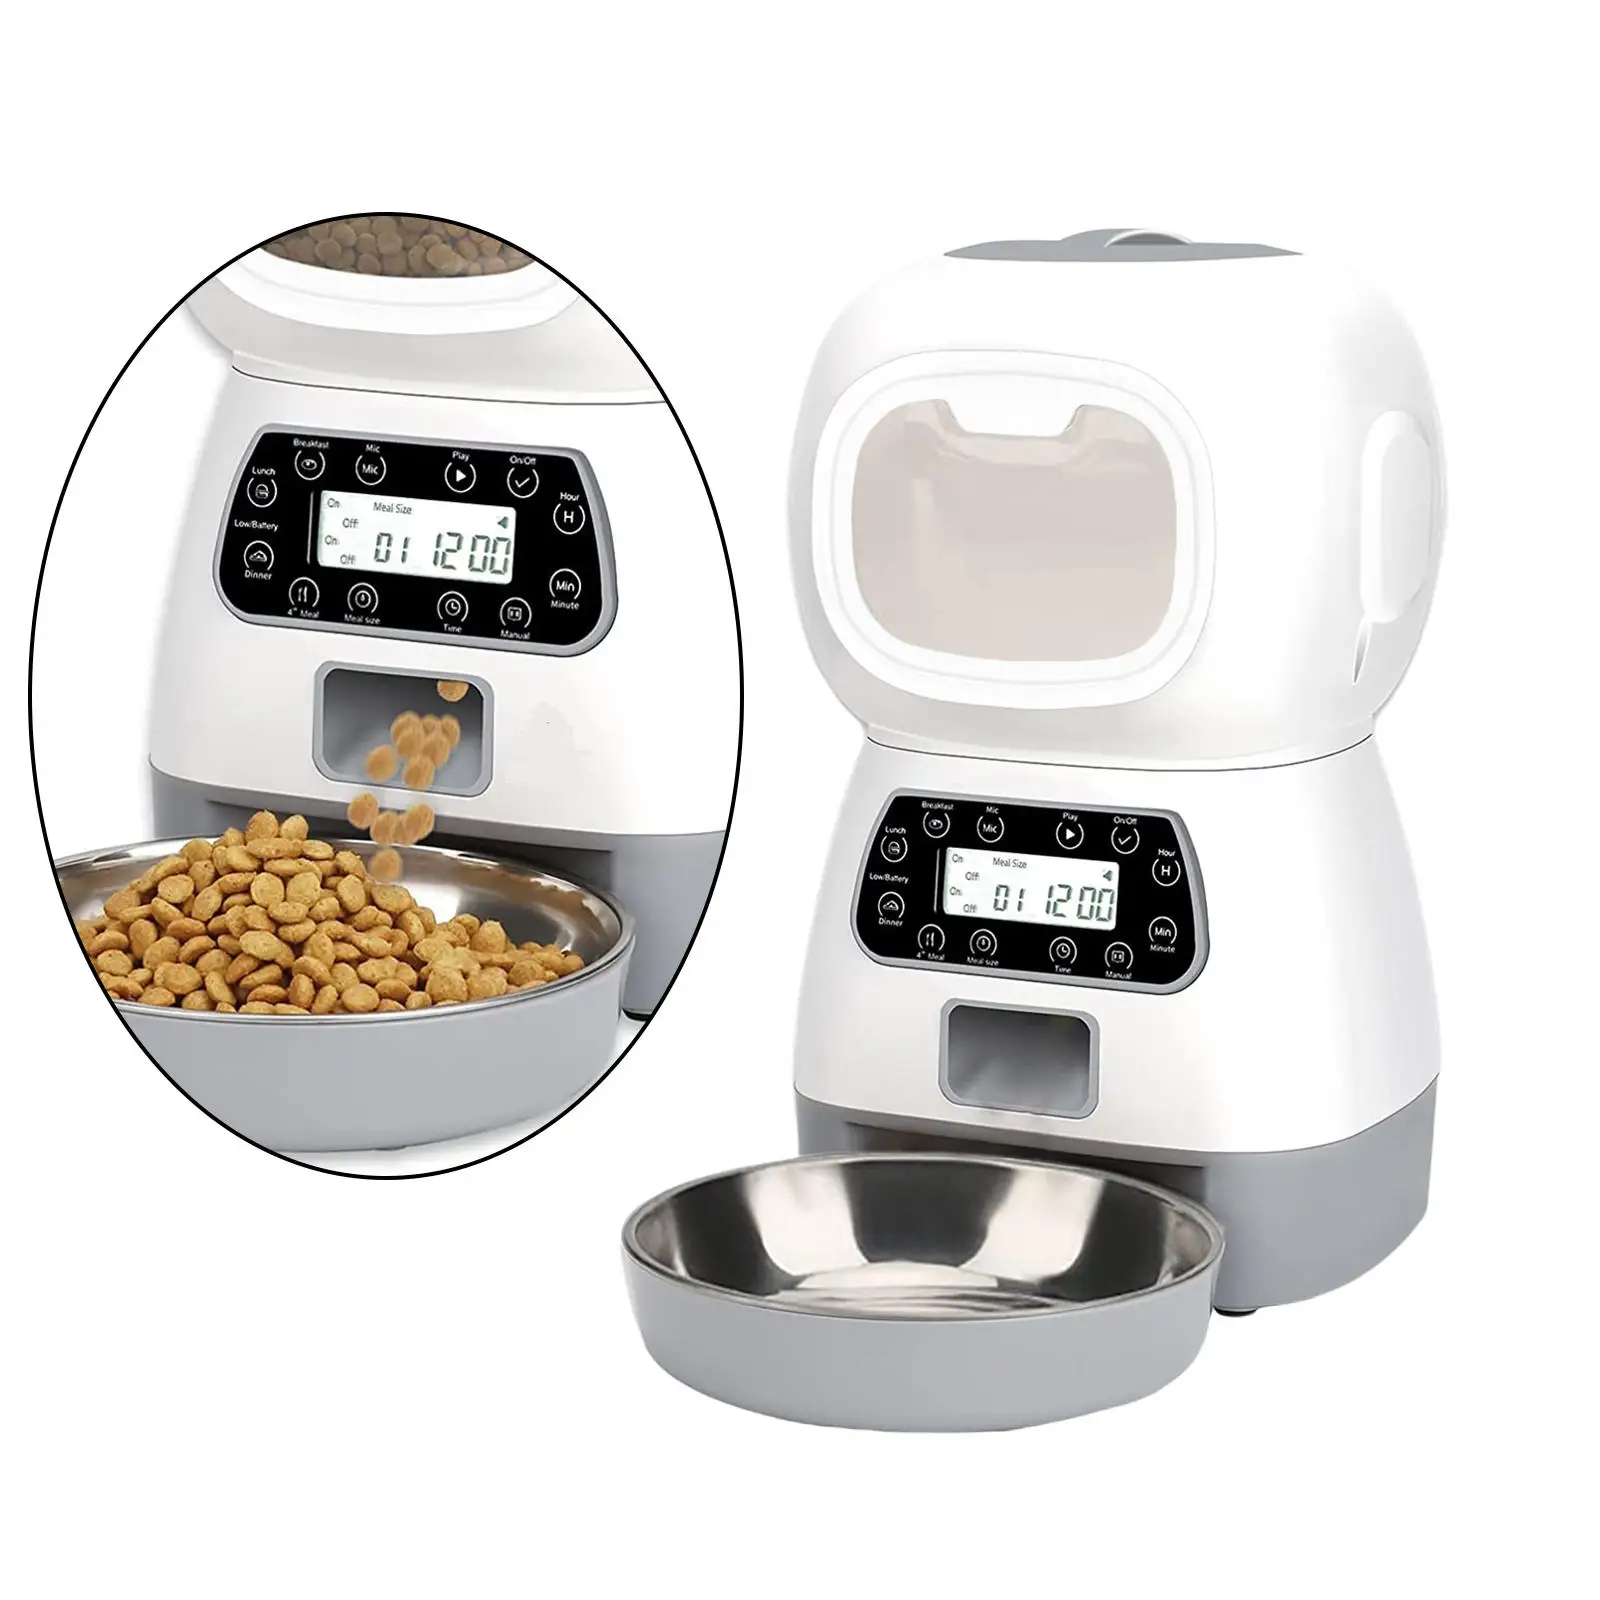 

Auto Pet Feeder Dry Food Dispenser Timed 4 Meals Per Day with Portion Control Voice Recorder for Dog Rabbits Feeding Supplies